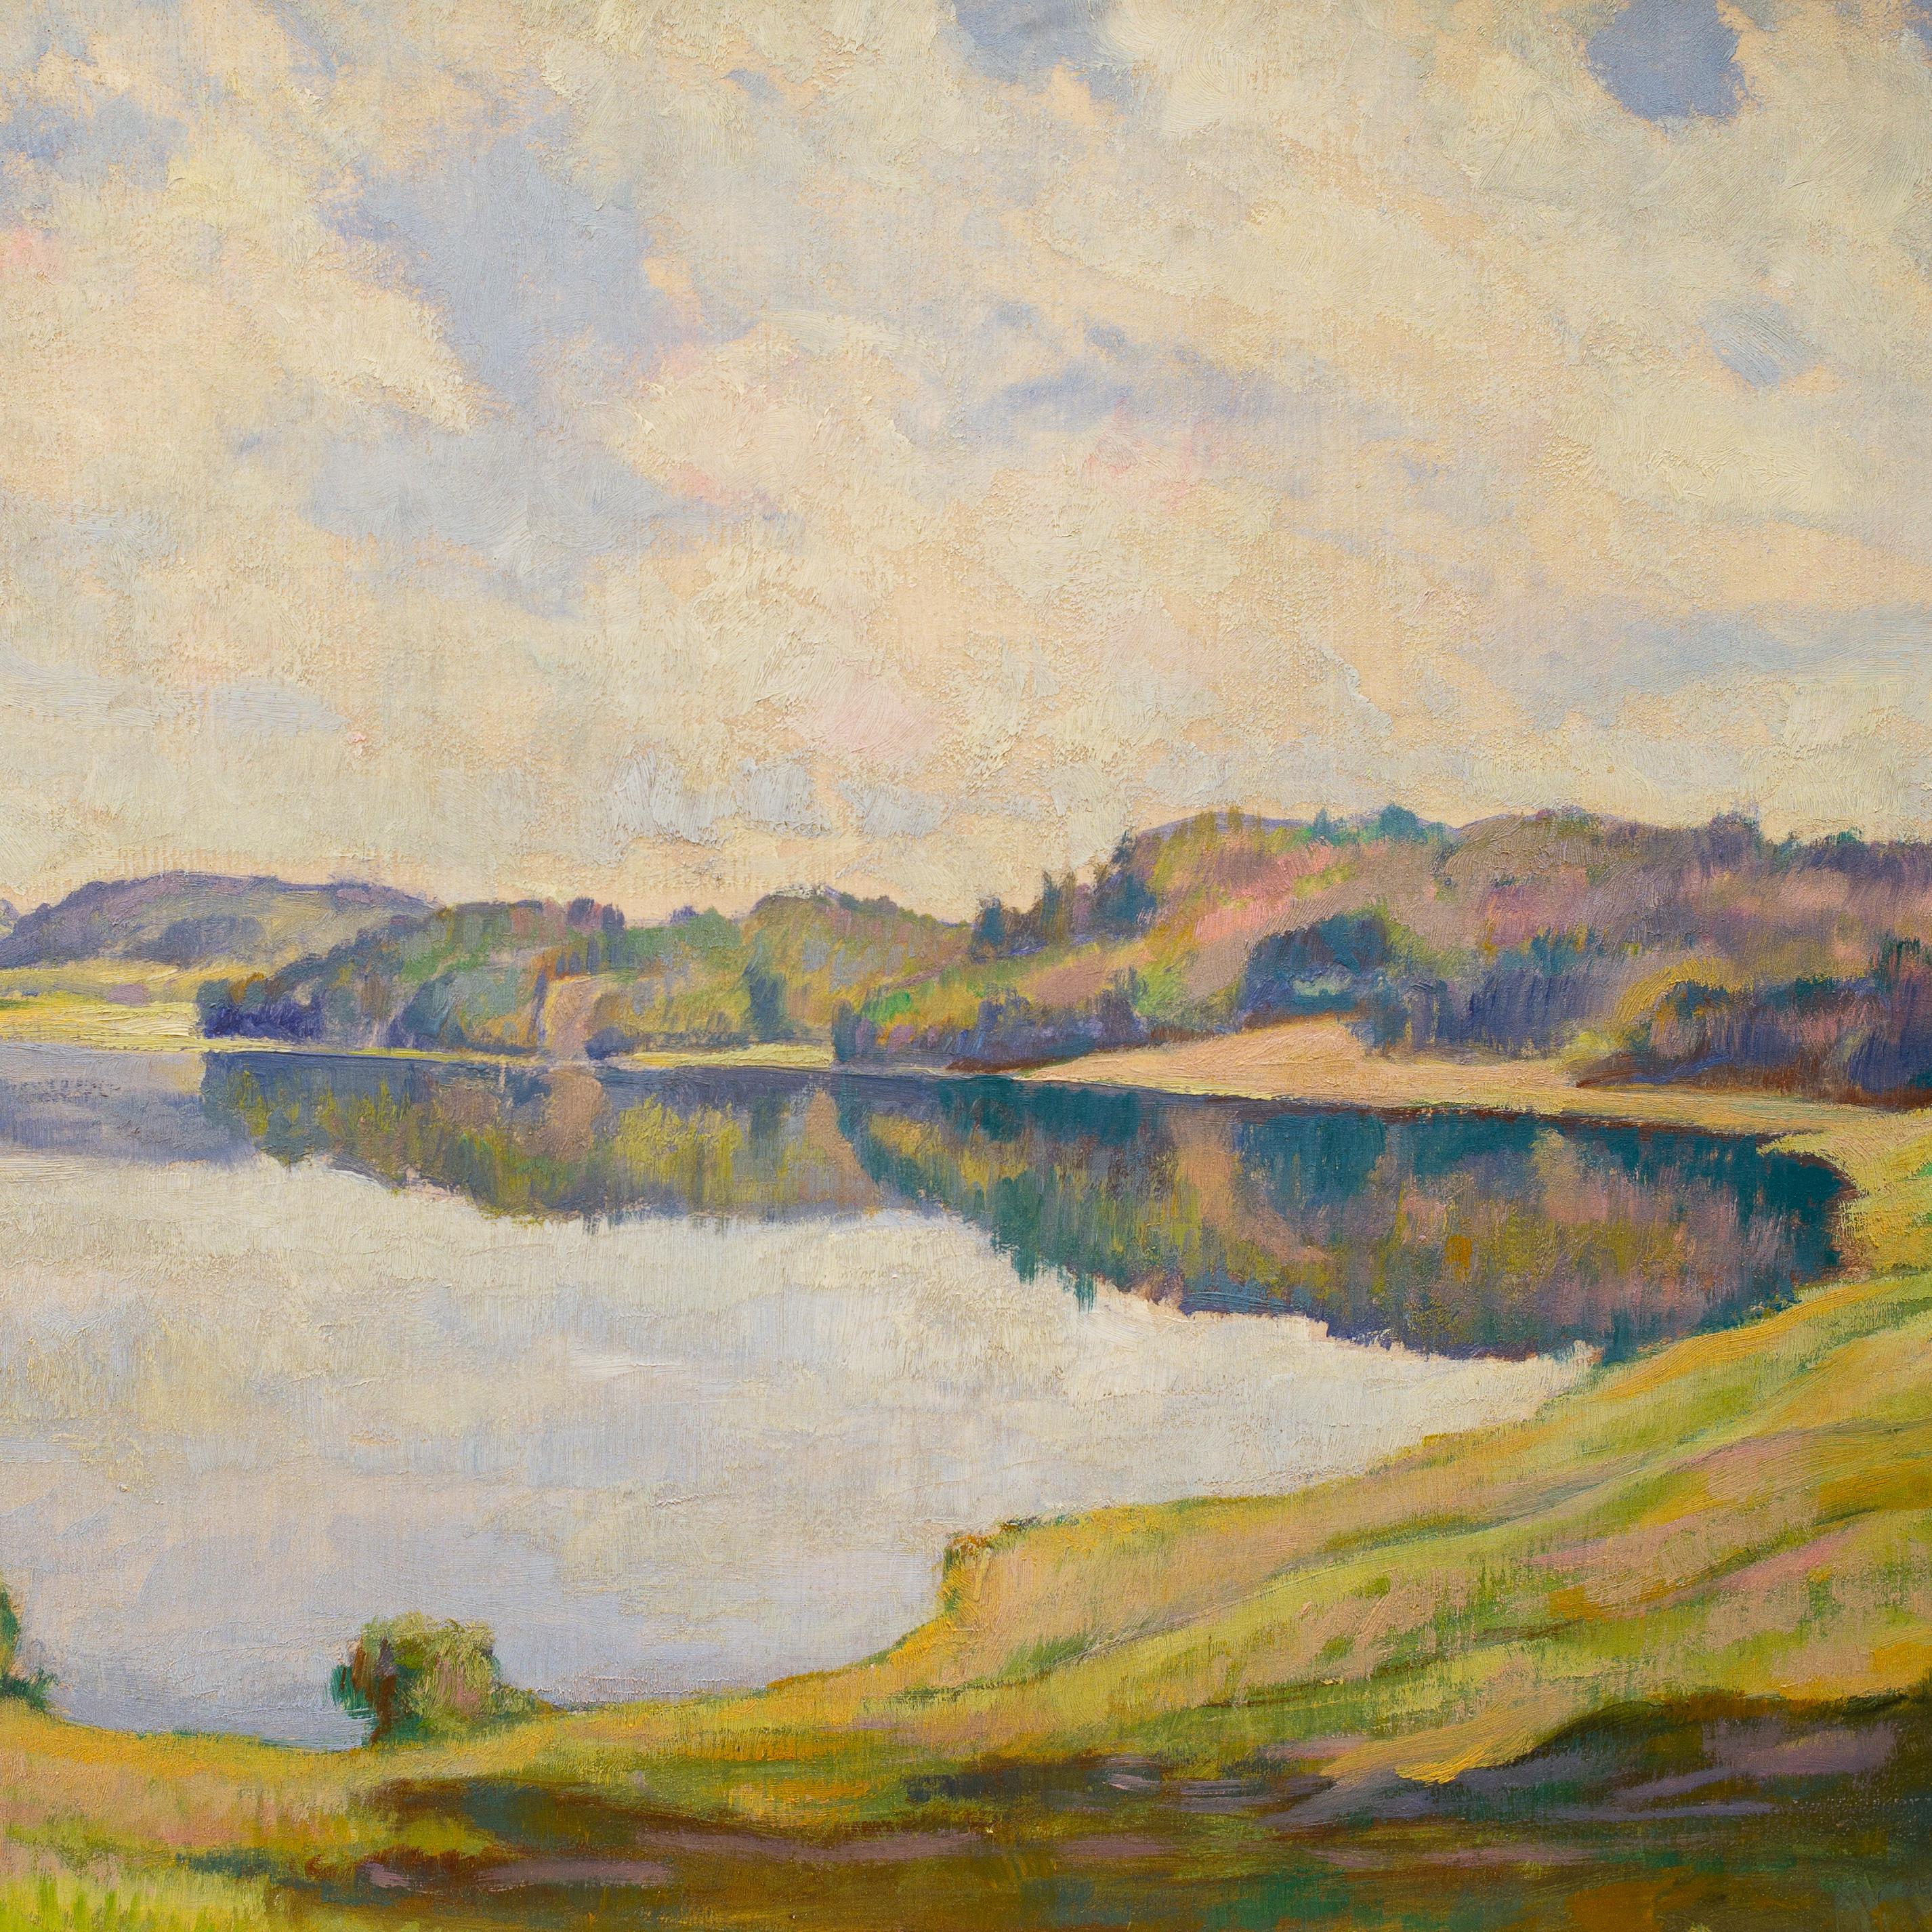 Lake View With Water Reflections by Swiss Artist Ernst Suter, Oil on Board, 1930 For Sale 1